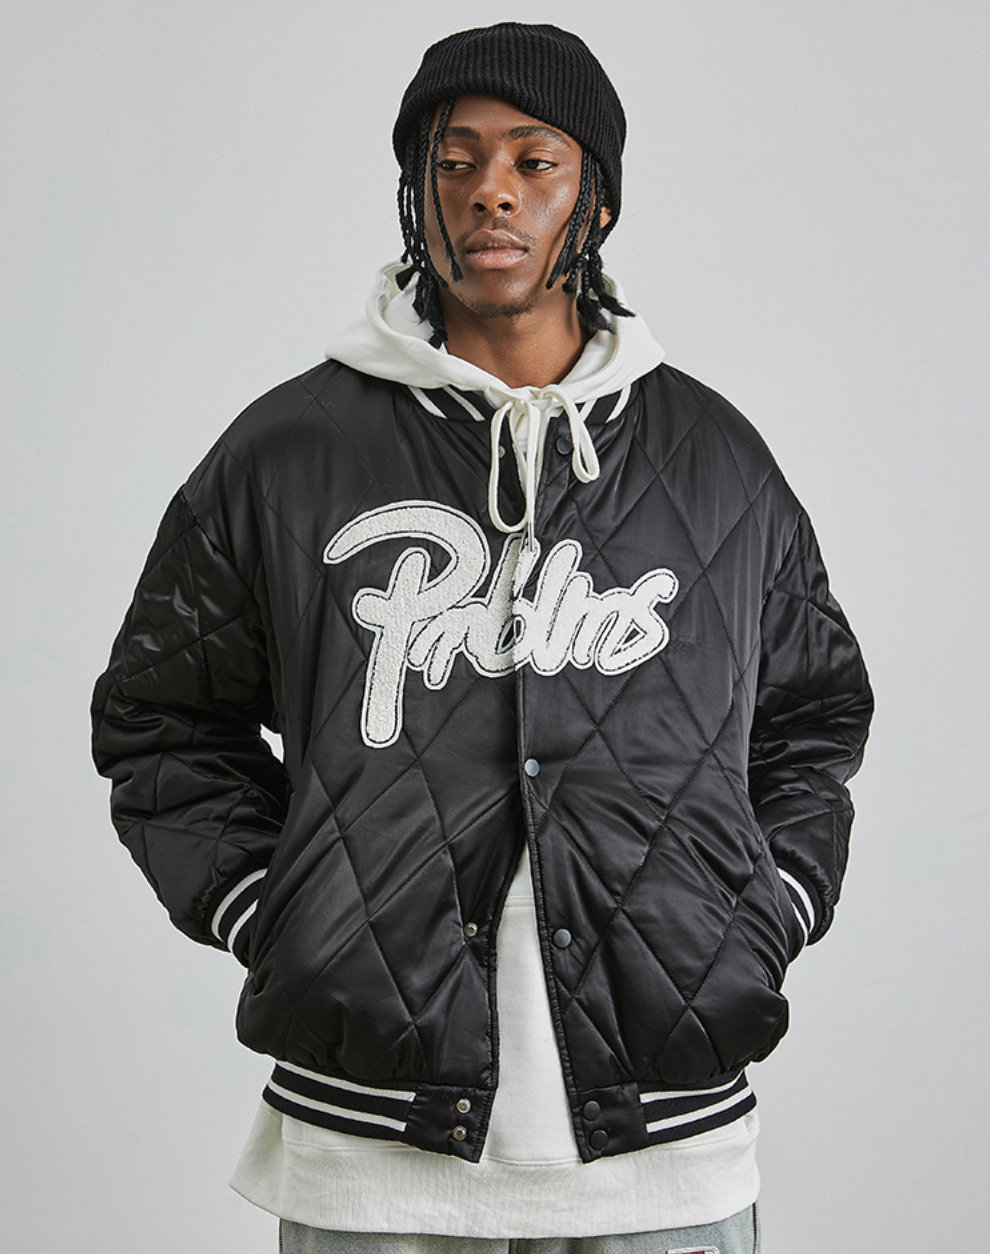 PRBLMS LOGO Embroidery Mercerized Quilted Jacket